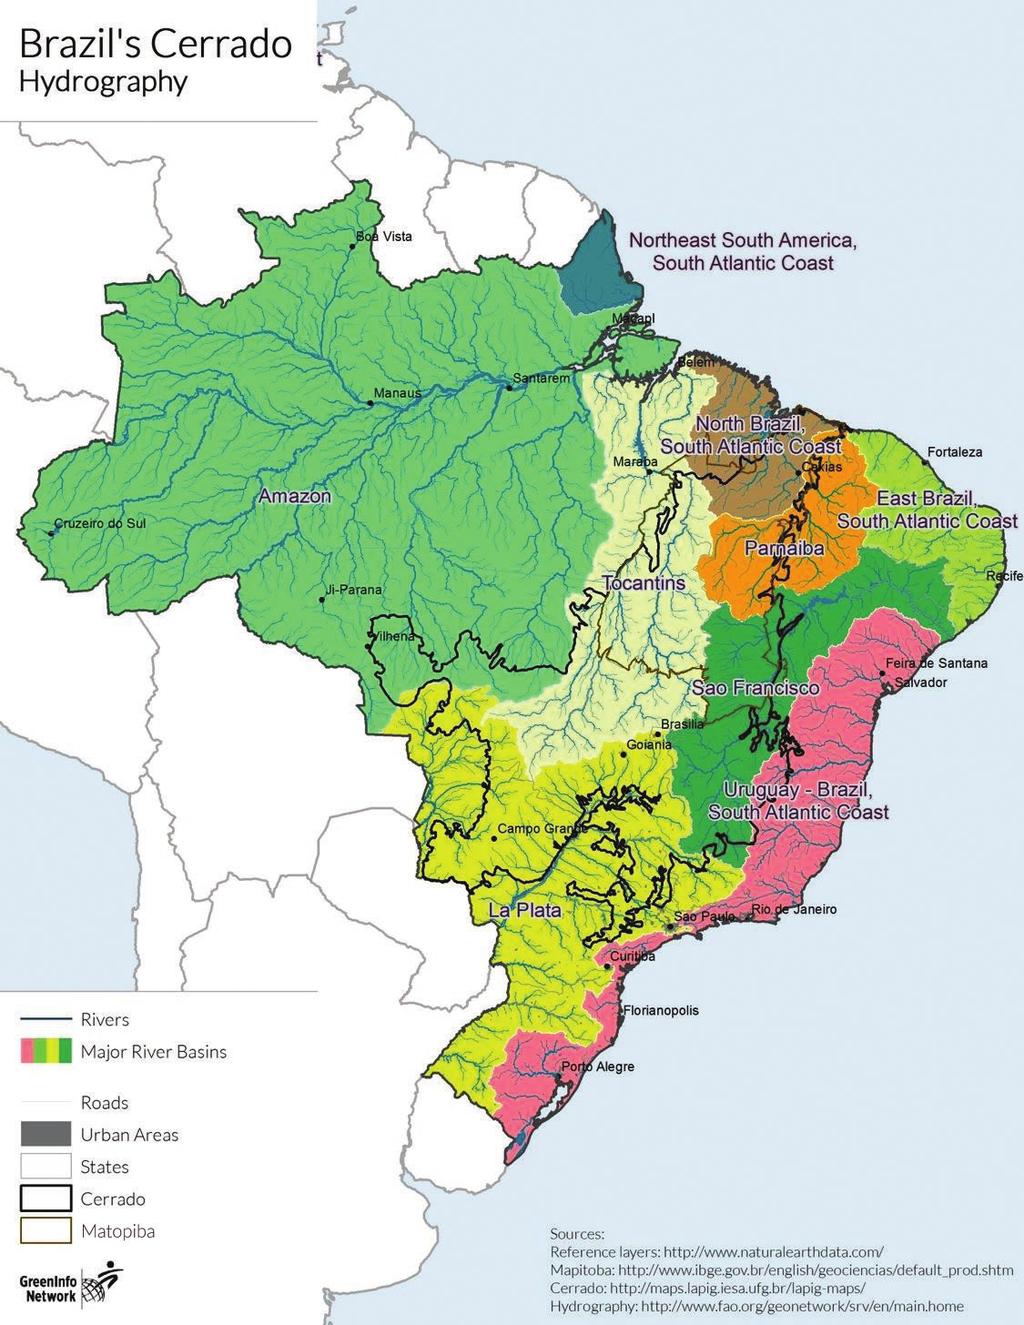 The Cerrado is often called the birthplace of the waters, because it